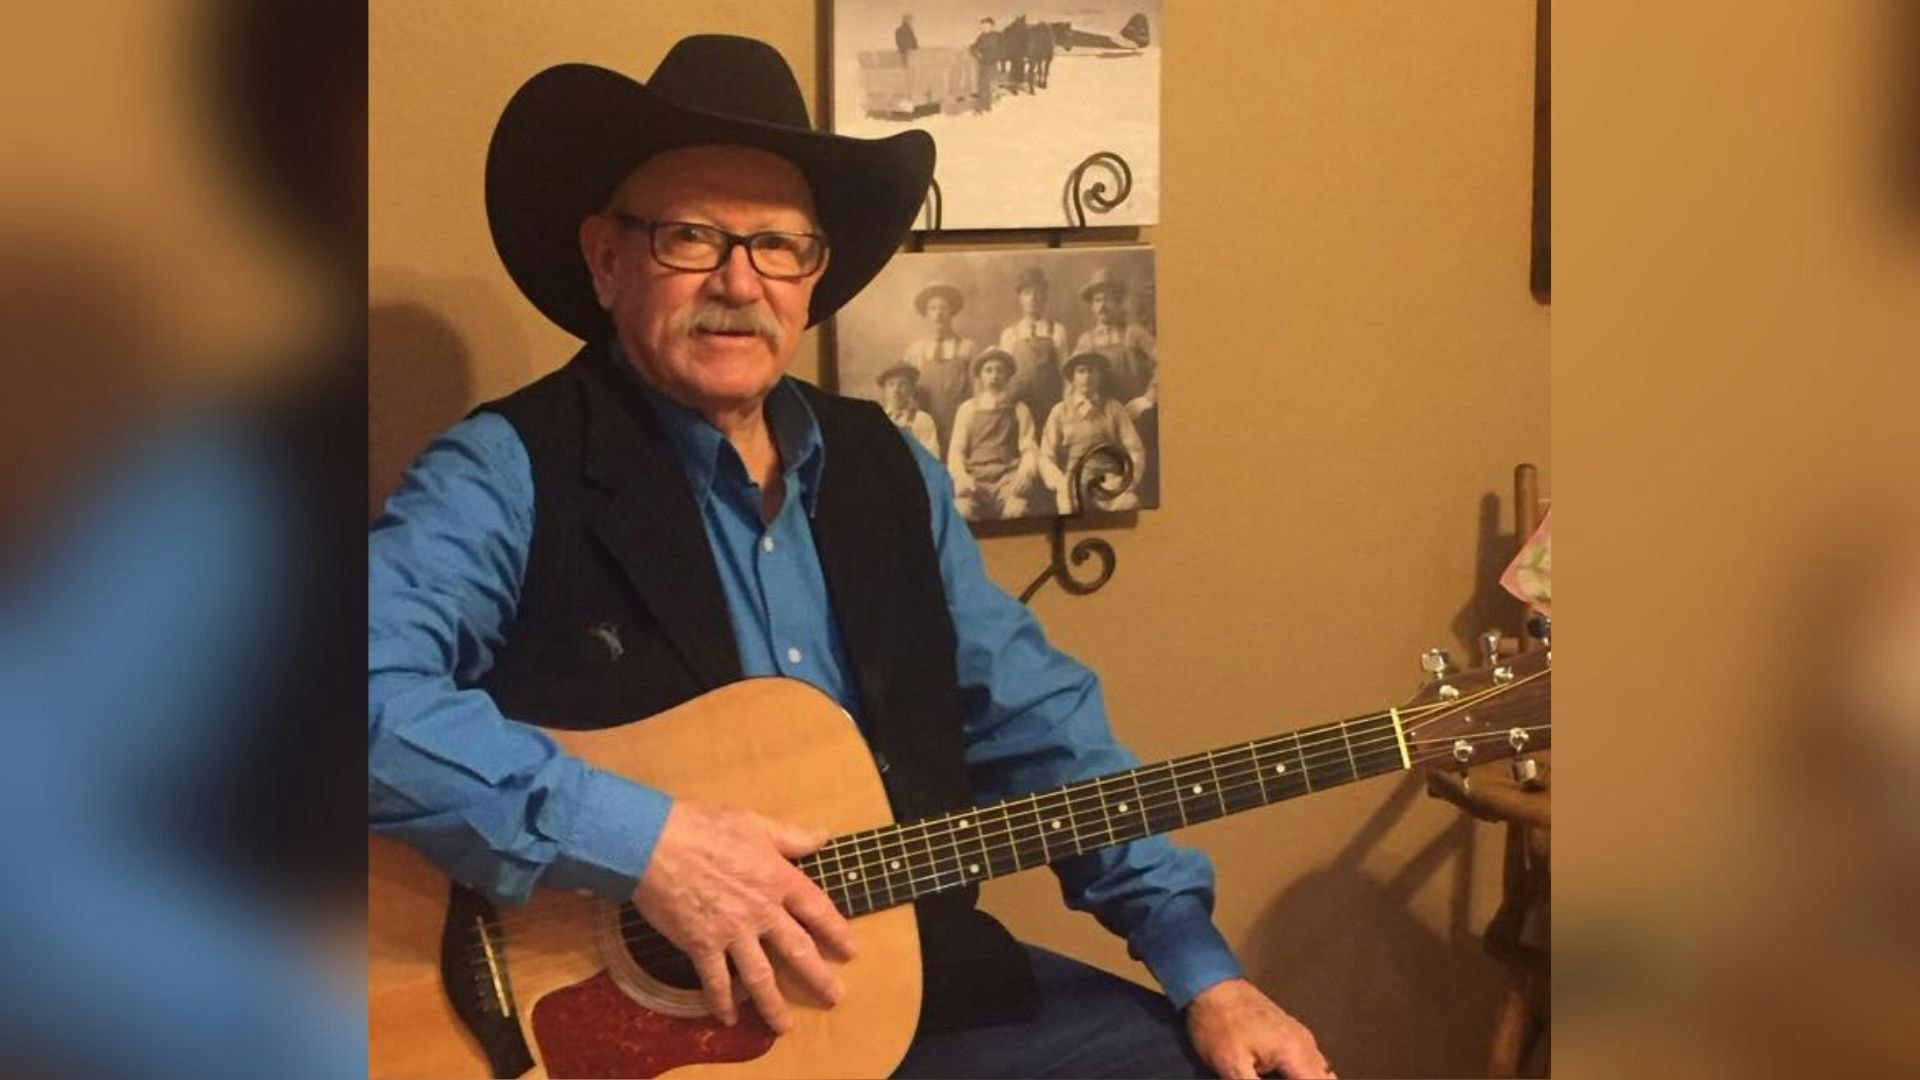 When he's not rancher or working with leather, Matt Avery likes to perform country western music.